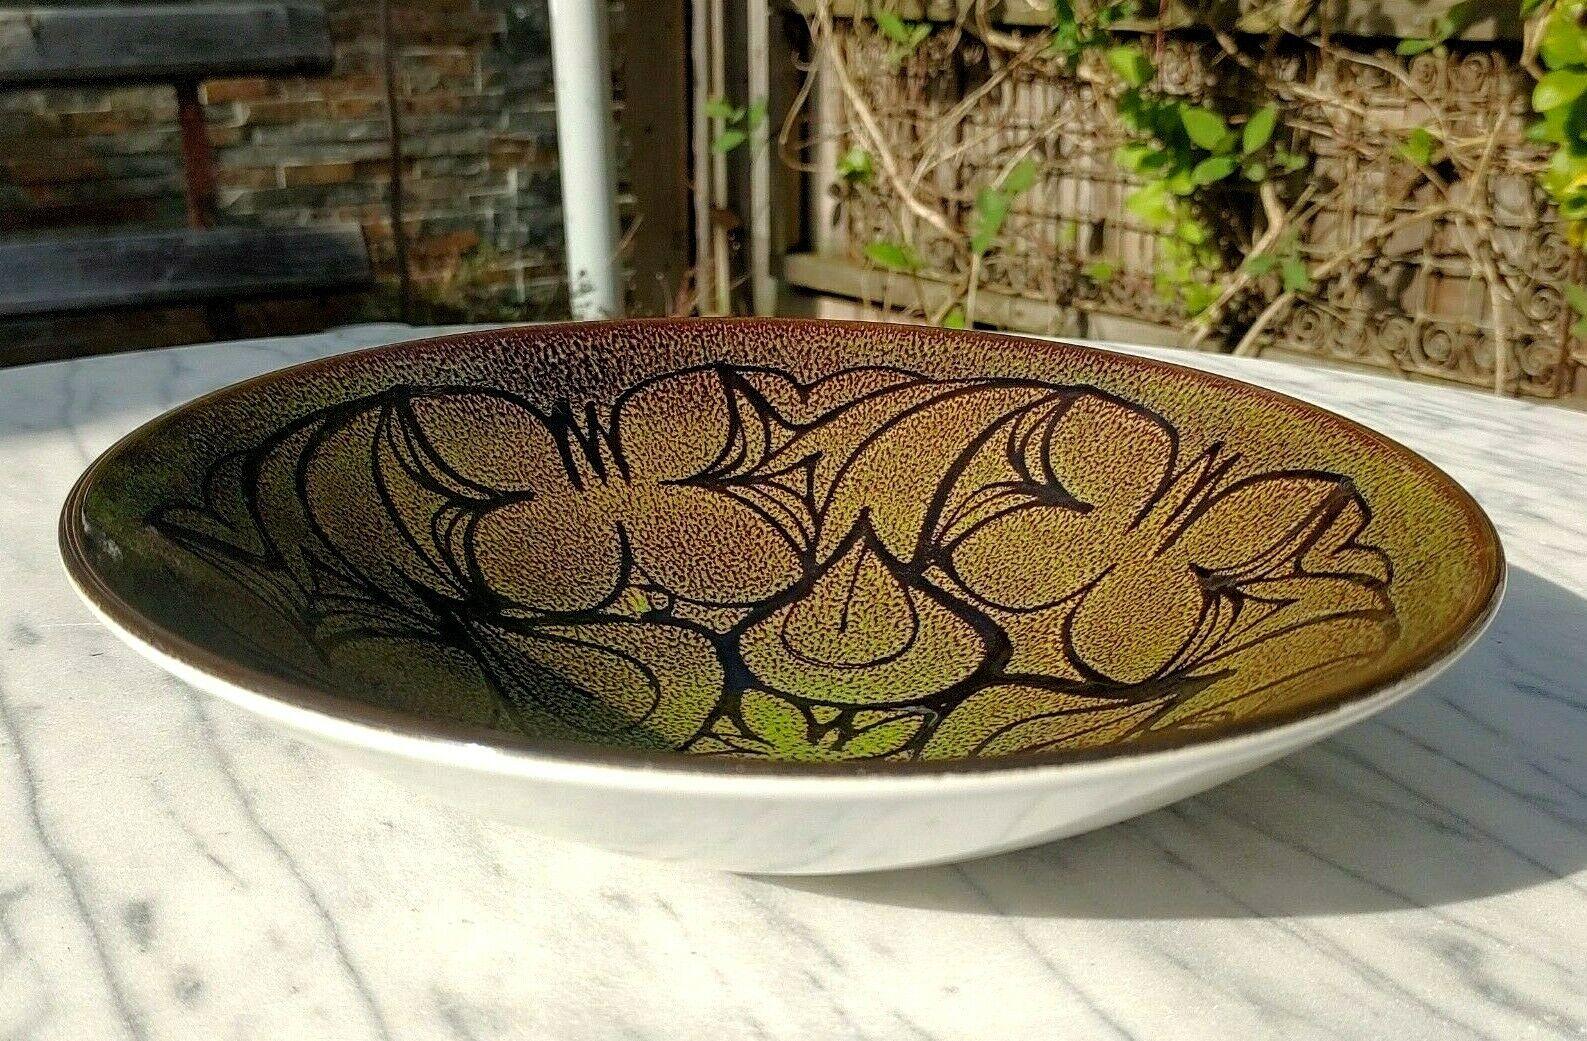 Vintage 1970s Poole Pottery Ceramic 'Aegean' #57 Bowl Dish Charger Plate - Tommy's Treasure